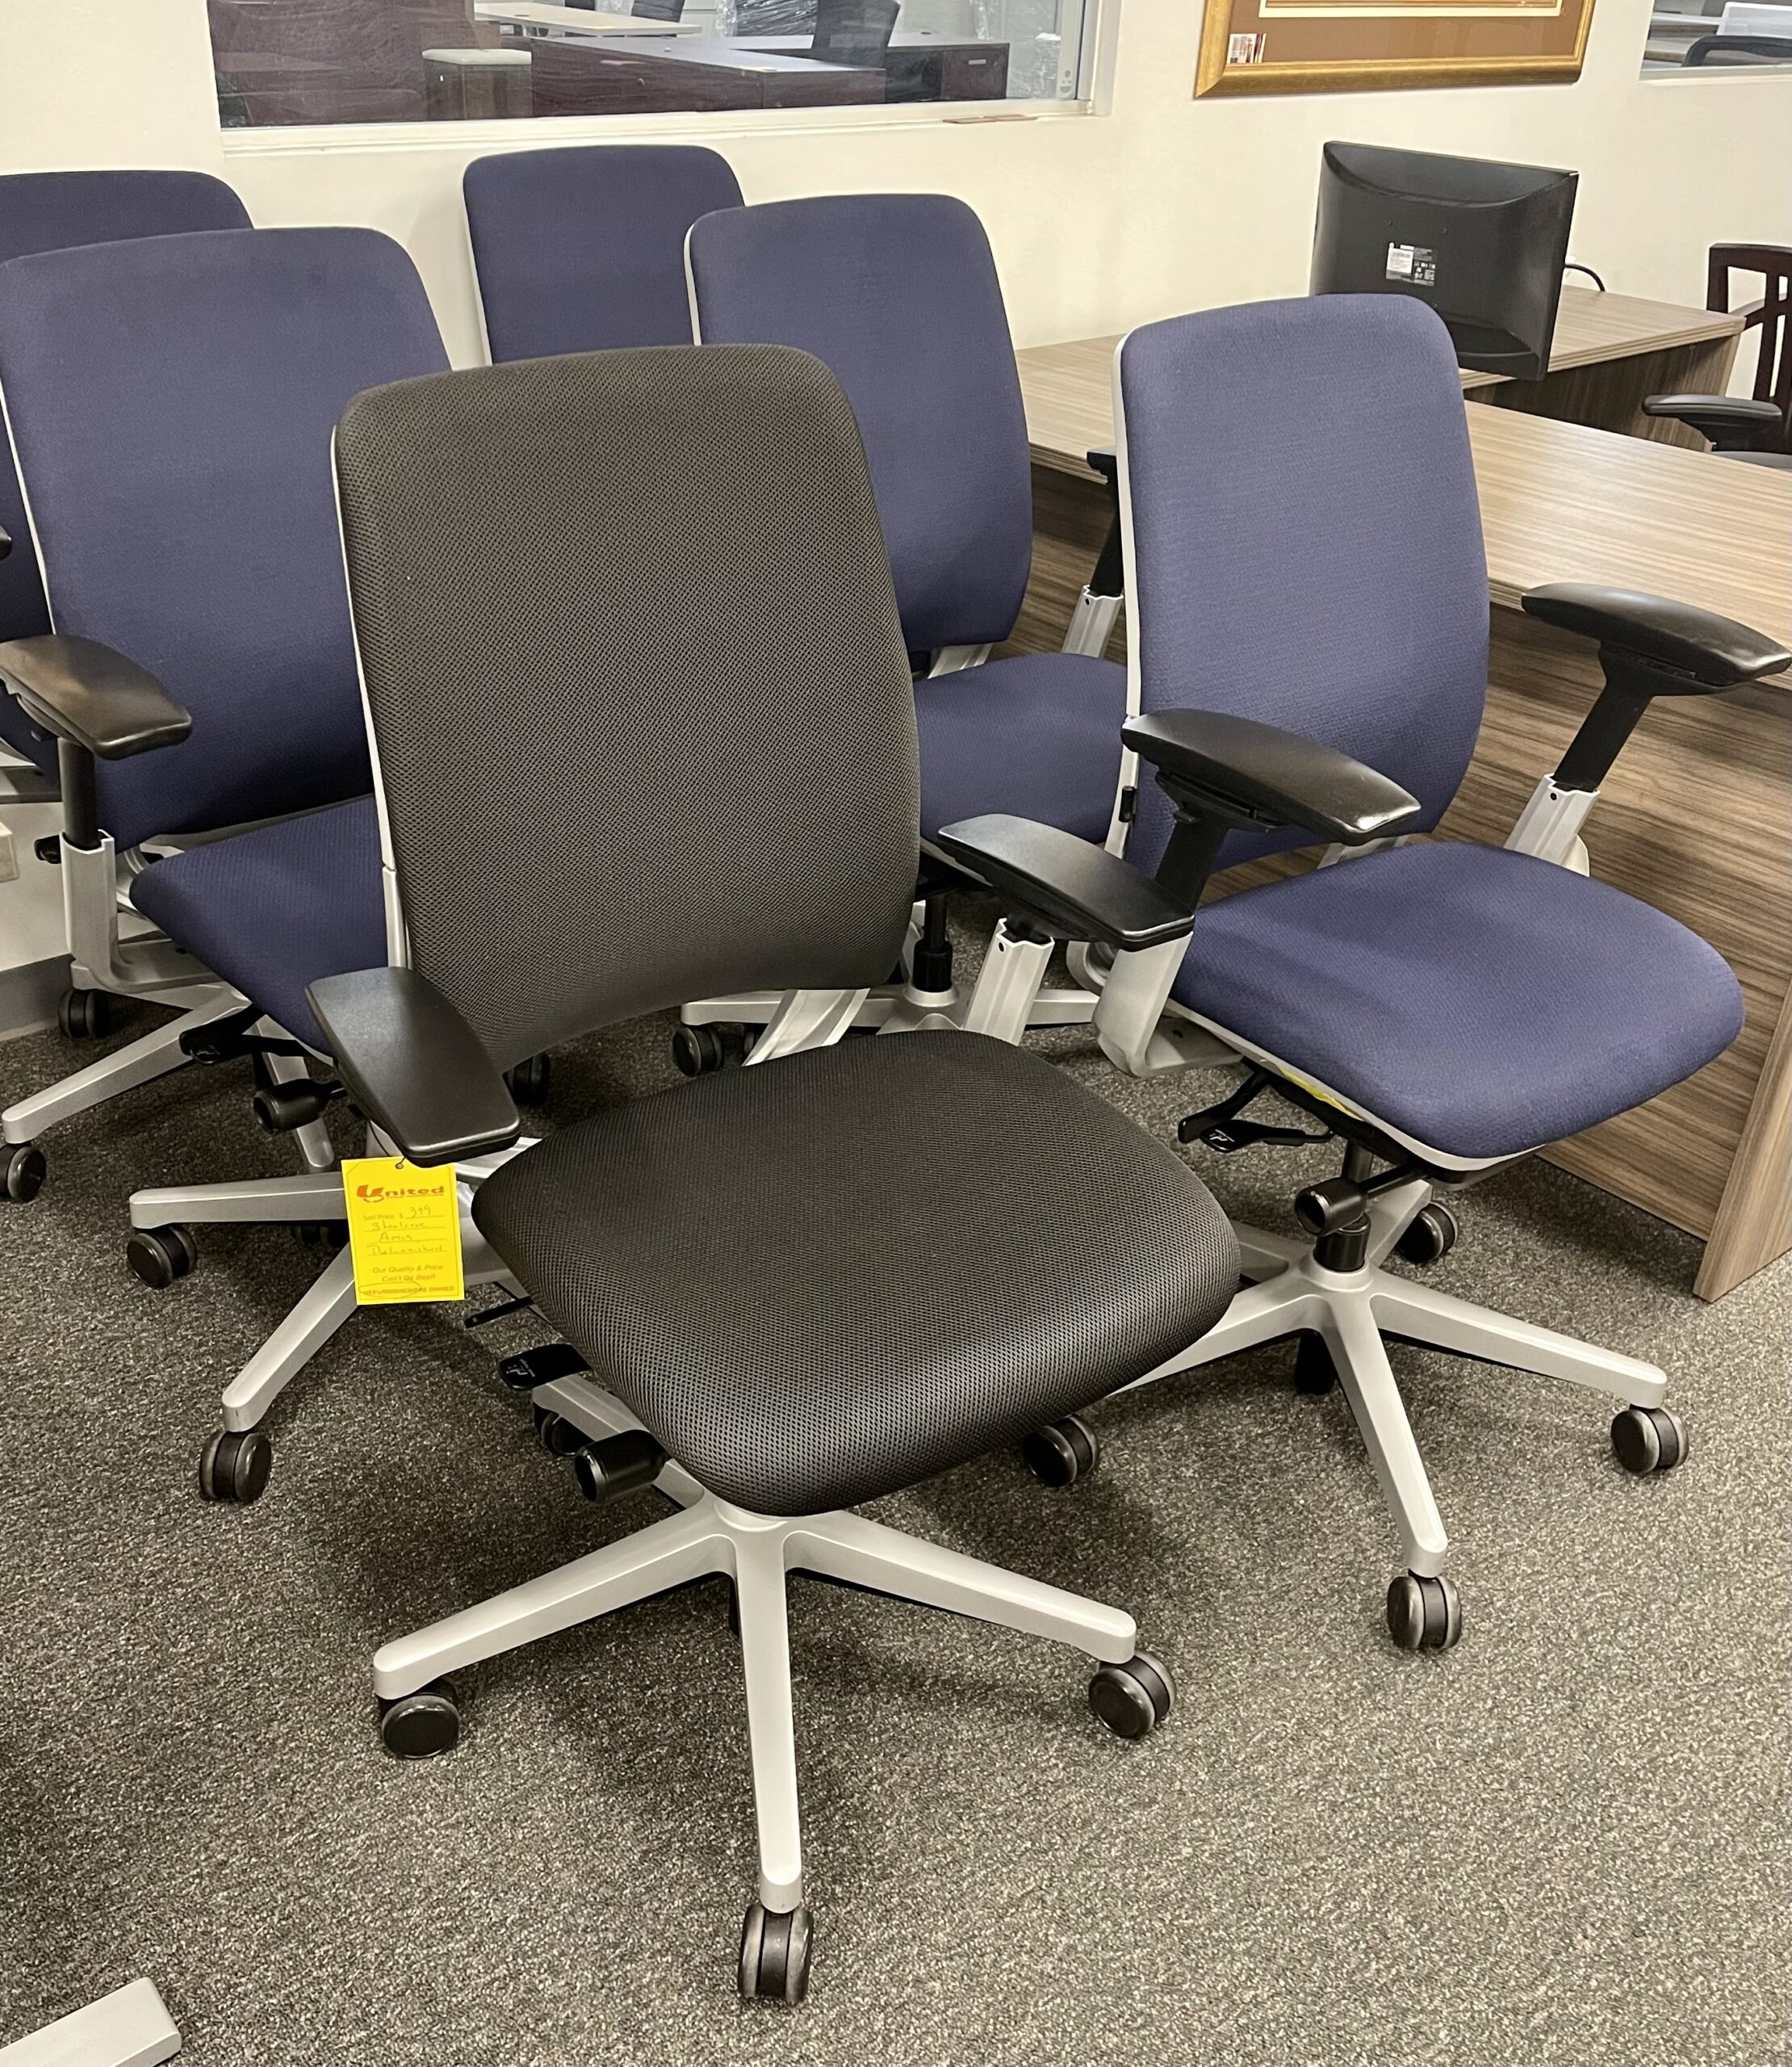 Pre-Owned Office Furniture, File Cabinets, Chairs | United Office Furniture